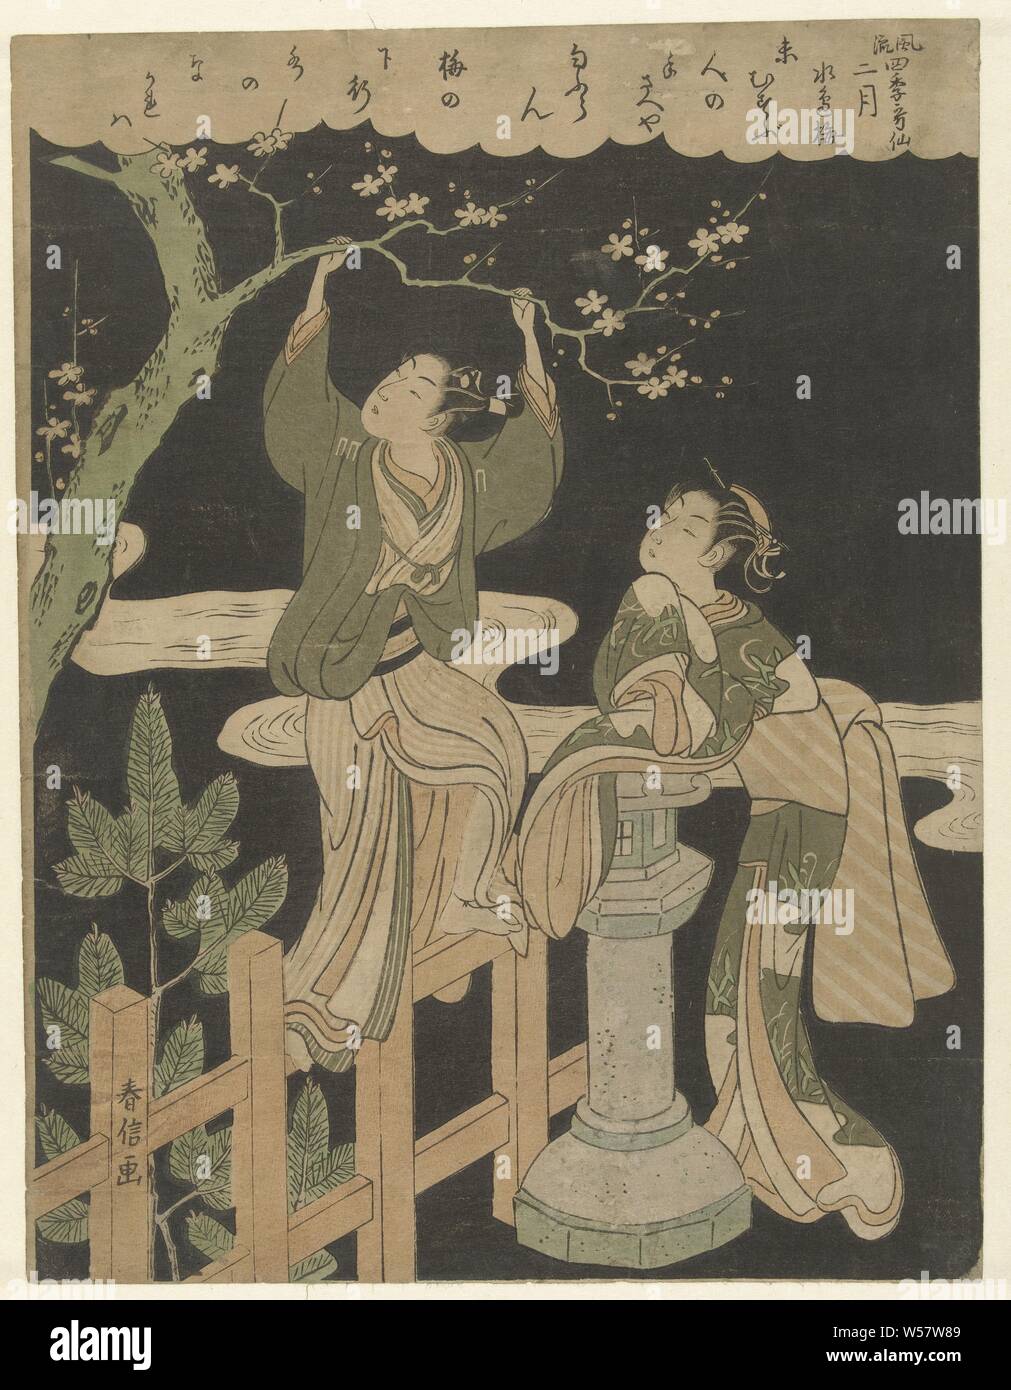 The second month of Nigatsu (title on object) Elegant poems about the four seasons. (series title) Furyu shiki kasen (series title on object), Boy, standing on fence, breaking down a branch with plum blossom, while a girl, leaning against a stone lantern, watches. Against a black background with river. A poem in a cloud-shaped cartouche along the top of the print., Suzuki Harunobu (mentioned on object), Japan, 1765 - 1770, paper, colour woodcut, h 282 mm × w 212 mm Stock Photo